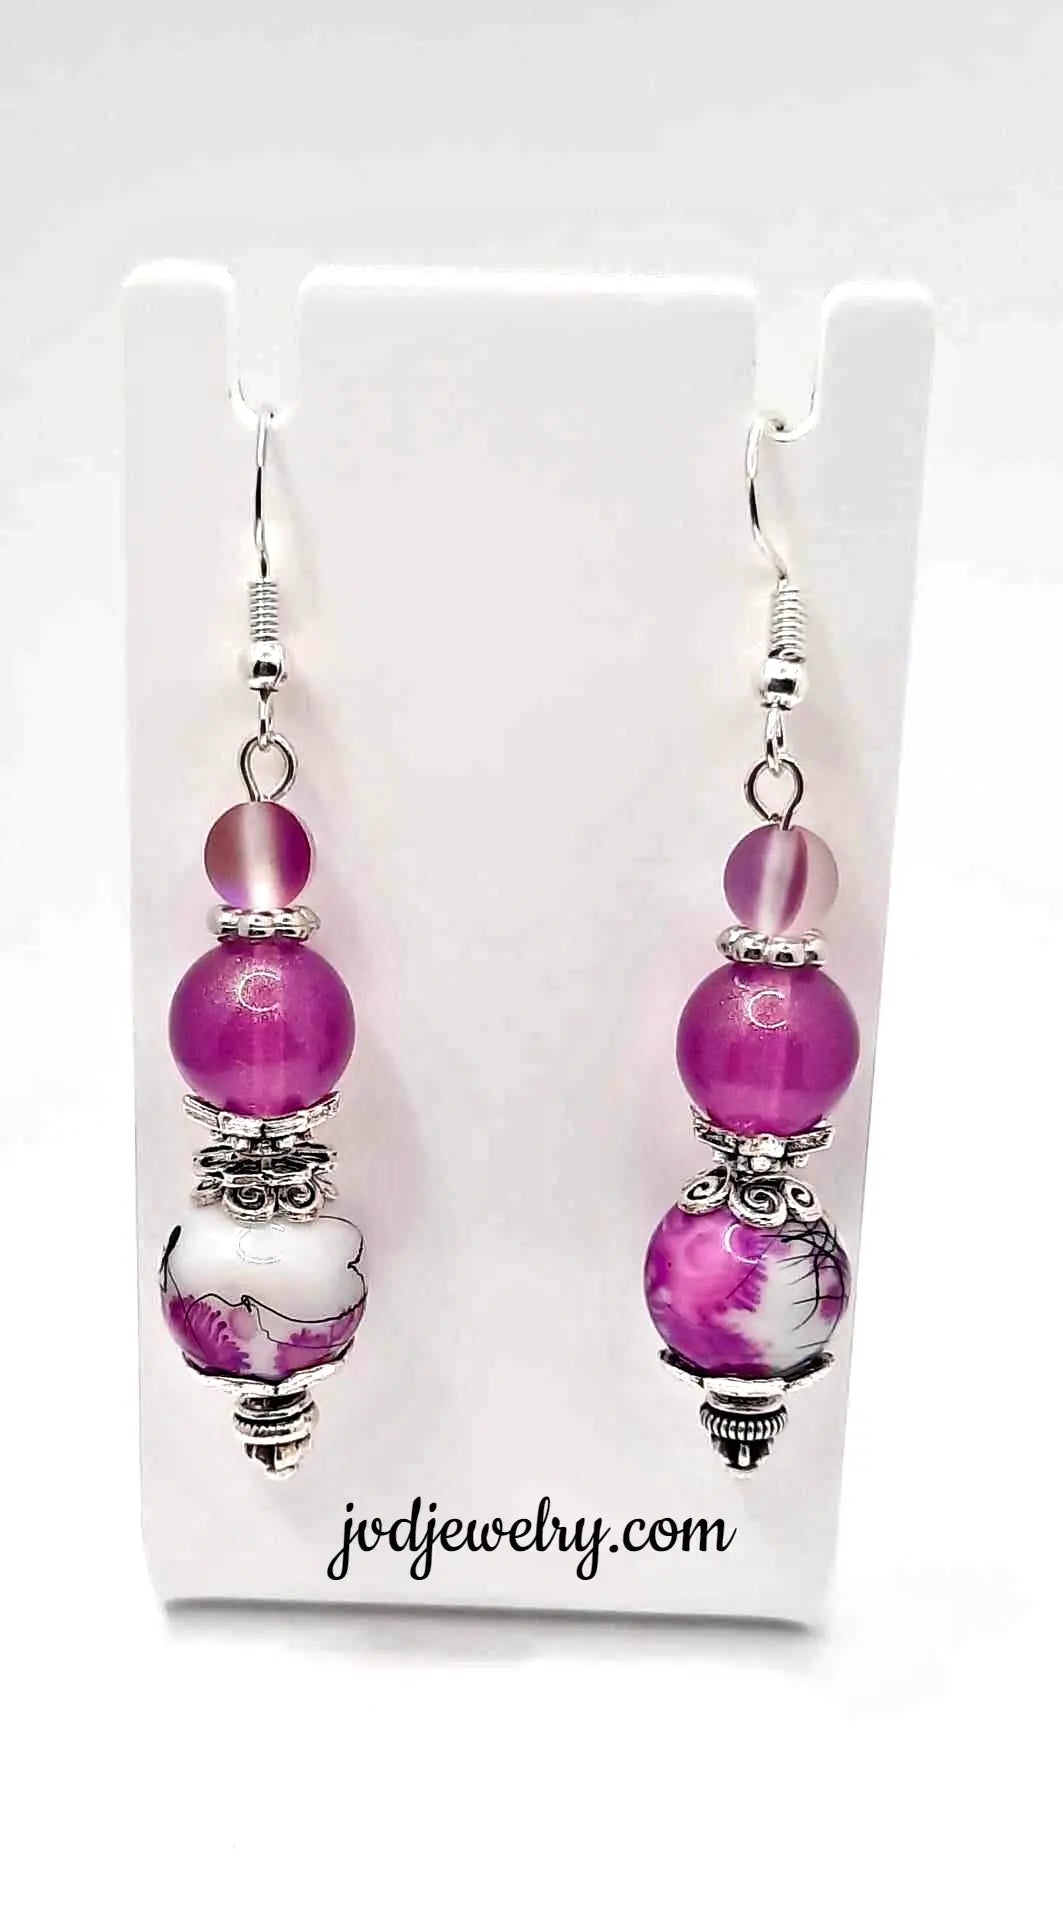 2.25 inches glass beaded earrings - Image #3